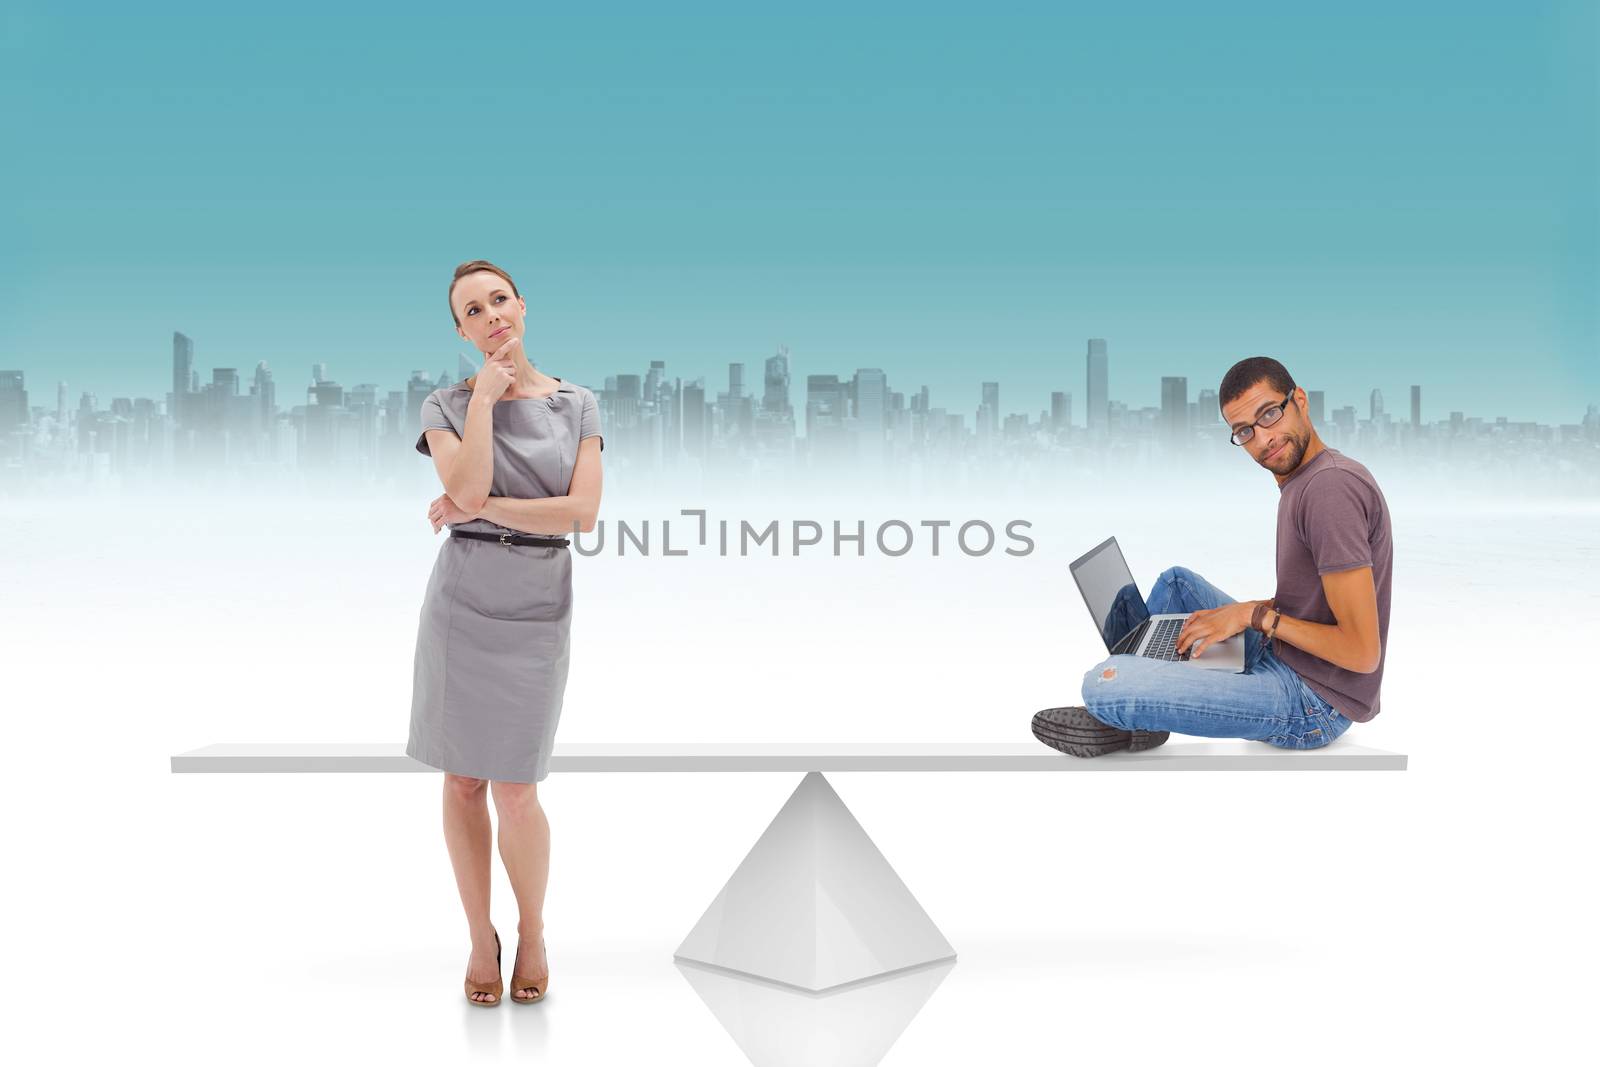 White scales weighing businesswoman and man against cityscape on horizon